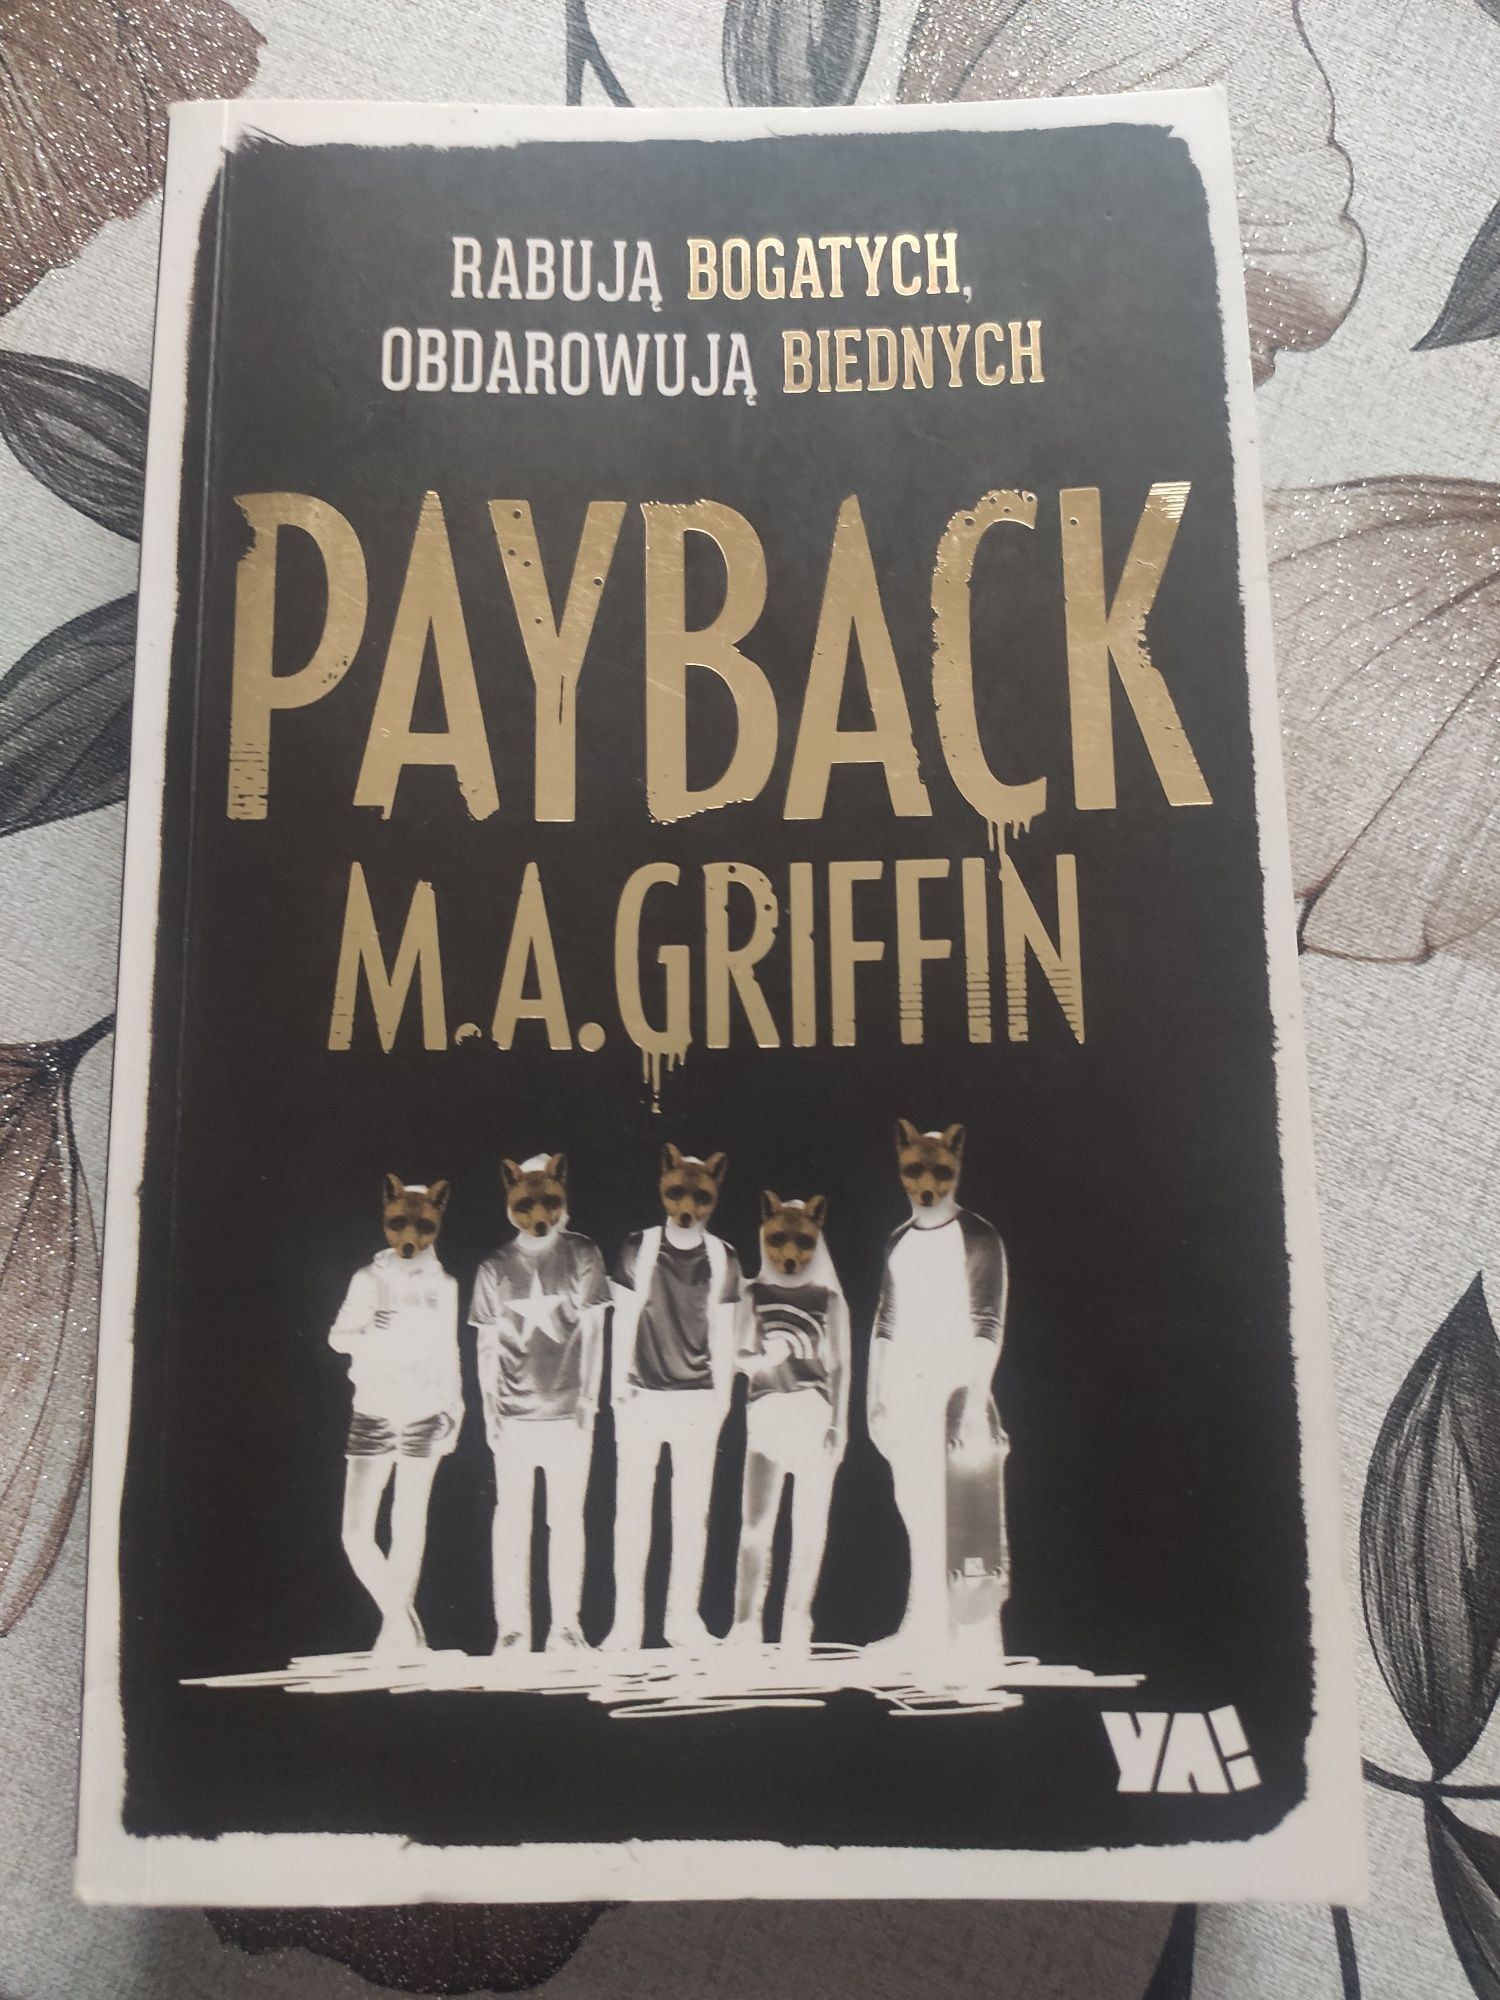 Payback M.A. Griffin